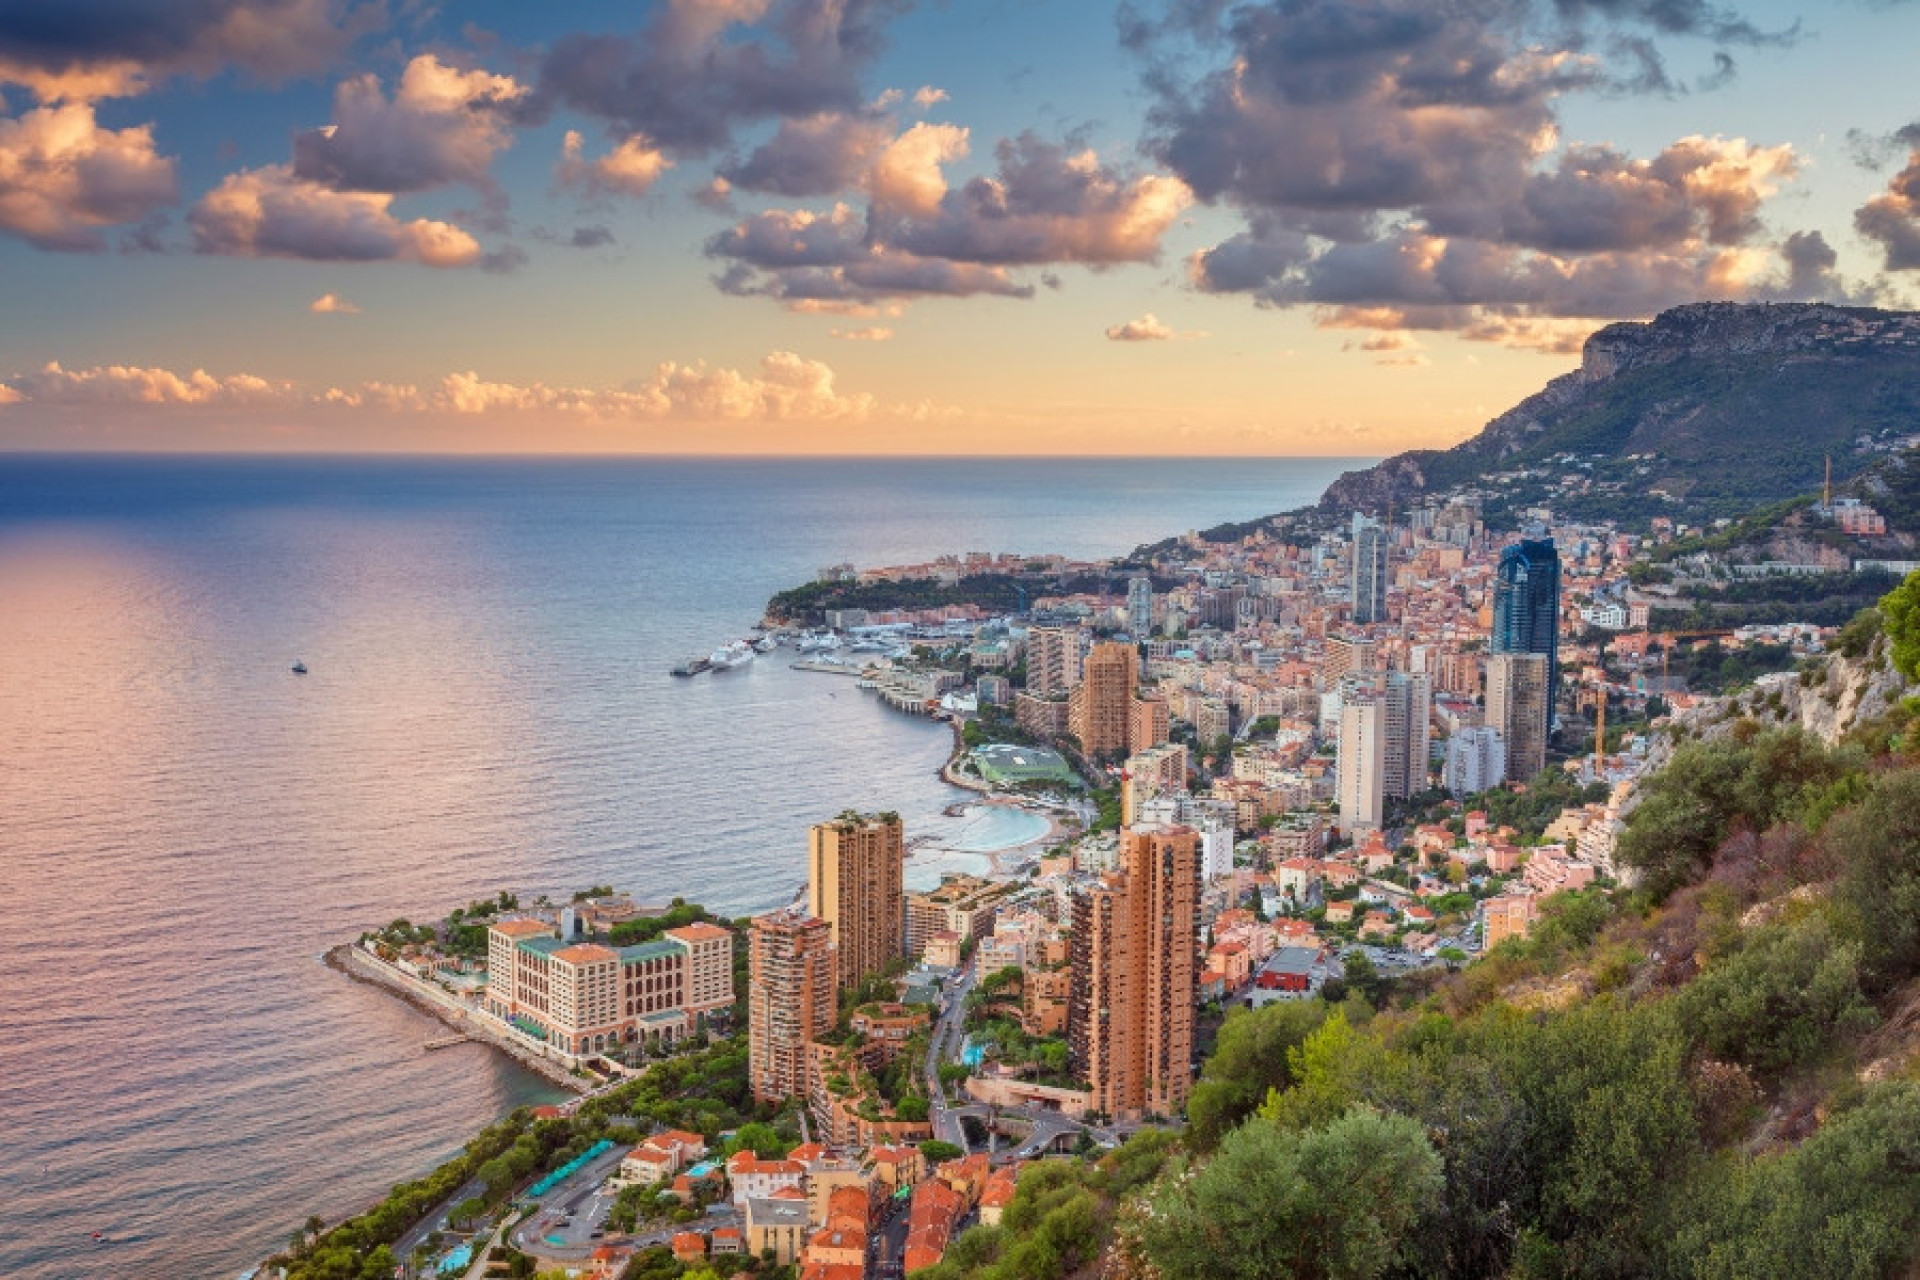 <p>Monaco proudly holds the top position for having the longest life expectancy globally. This distinction reflects the principality's excellent healthcare, affluent living conditions, and supportive social environment. Their healthy Mediterranean diet and significant time spent outdoors greatly contribute to the population's longevity.</p> <p>Sources: (World Population Review) (Daily Mail) (Altoo) (database.earth) (Statista) (The World Factbook) (Macrotrends)<br><br>See also: <a href="https://www.starsinsider.com/travel/193890/countries-to-visit-that-love-american-tourists">Countries that love American tourists</a></p>